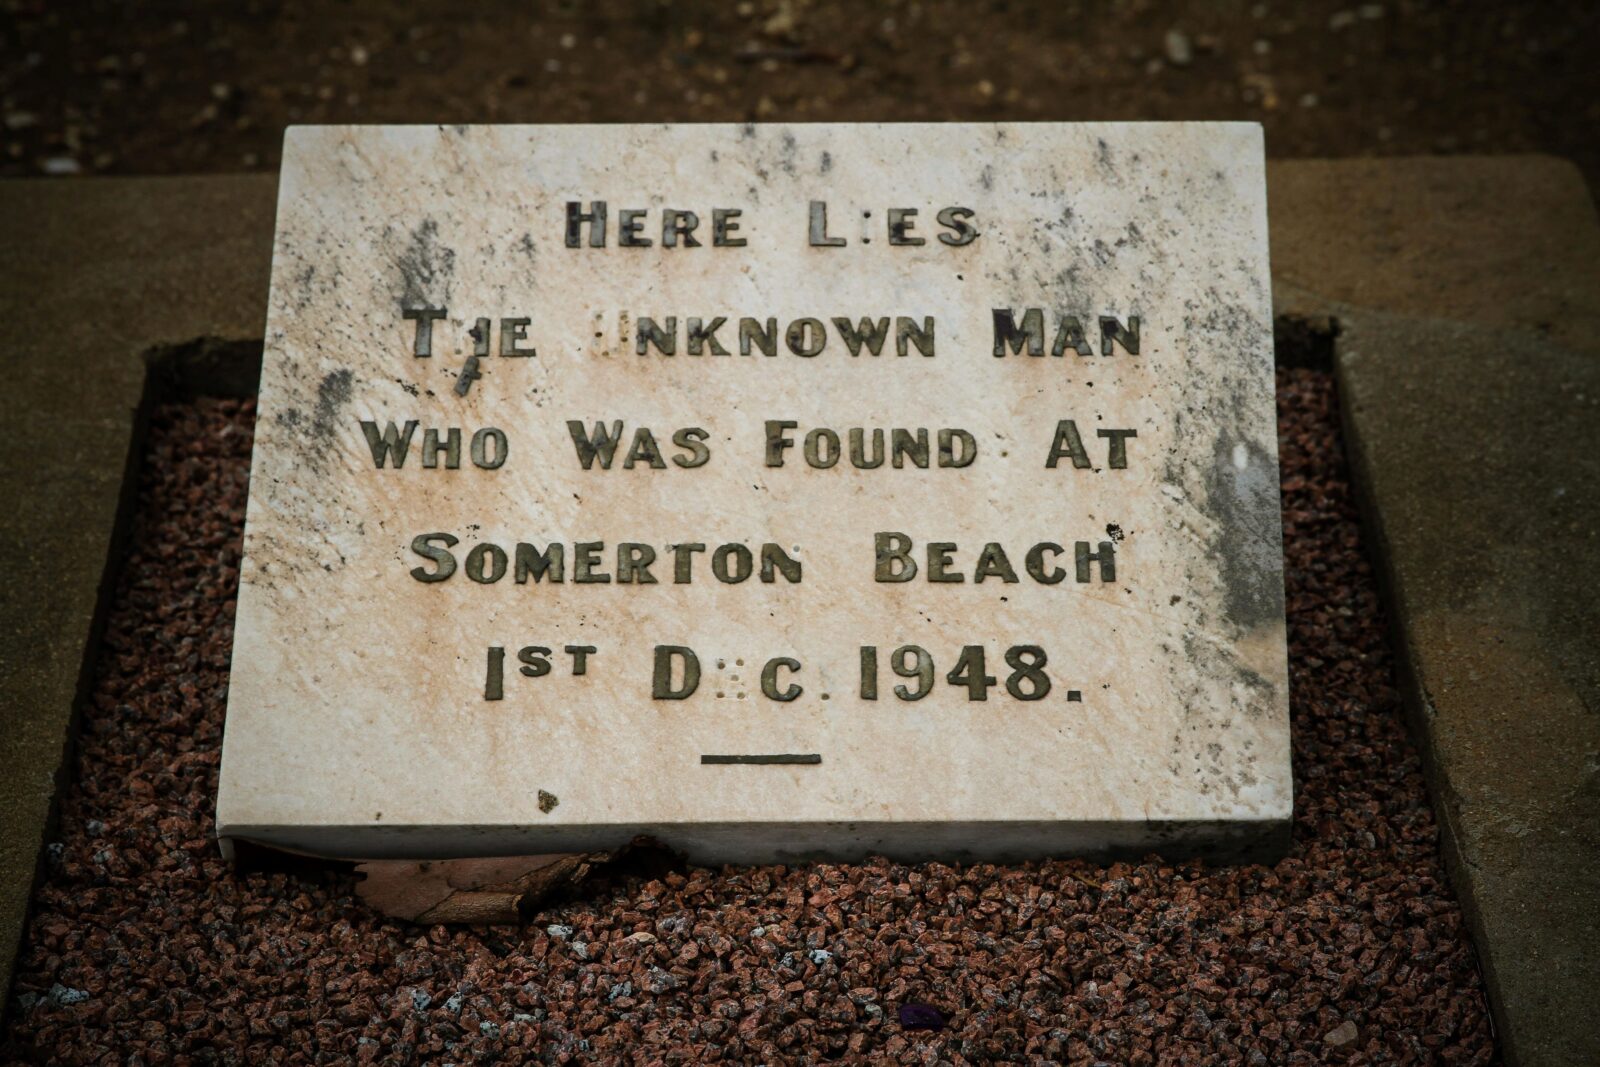 The wooden cross initially placed on the grave had the words "Unknown Man" inscribed on it. It was s